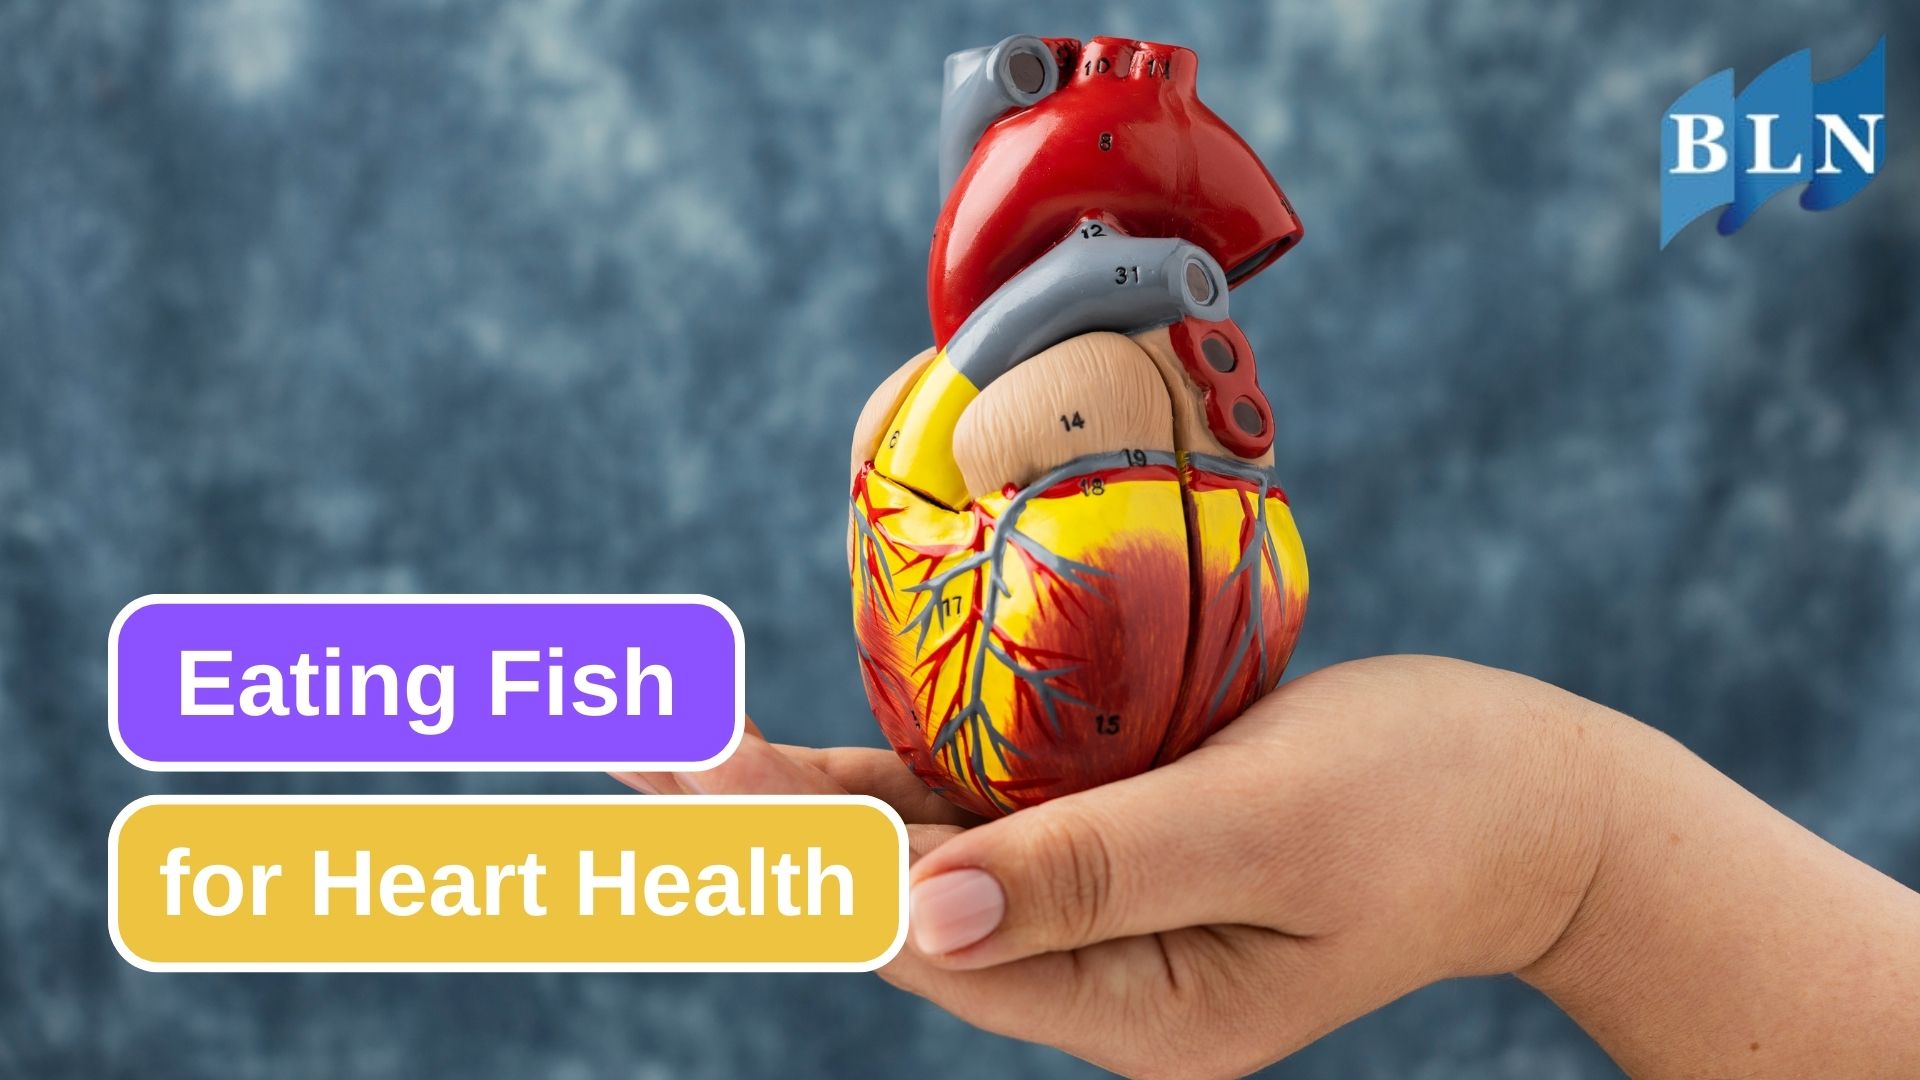 The 9 Benefits of Eating Fish for Heart Health